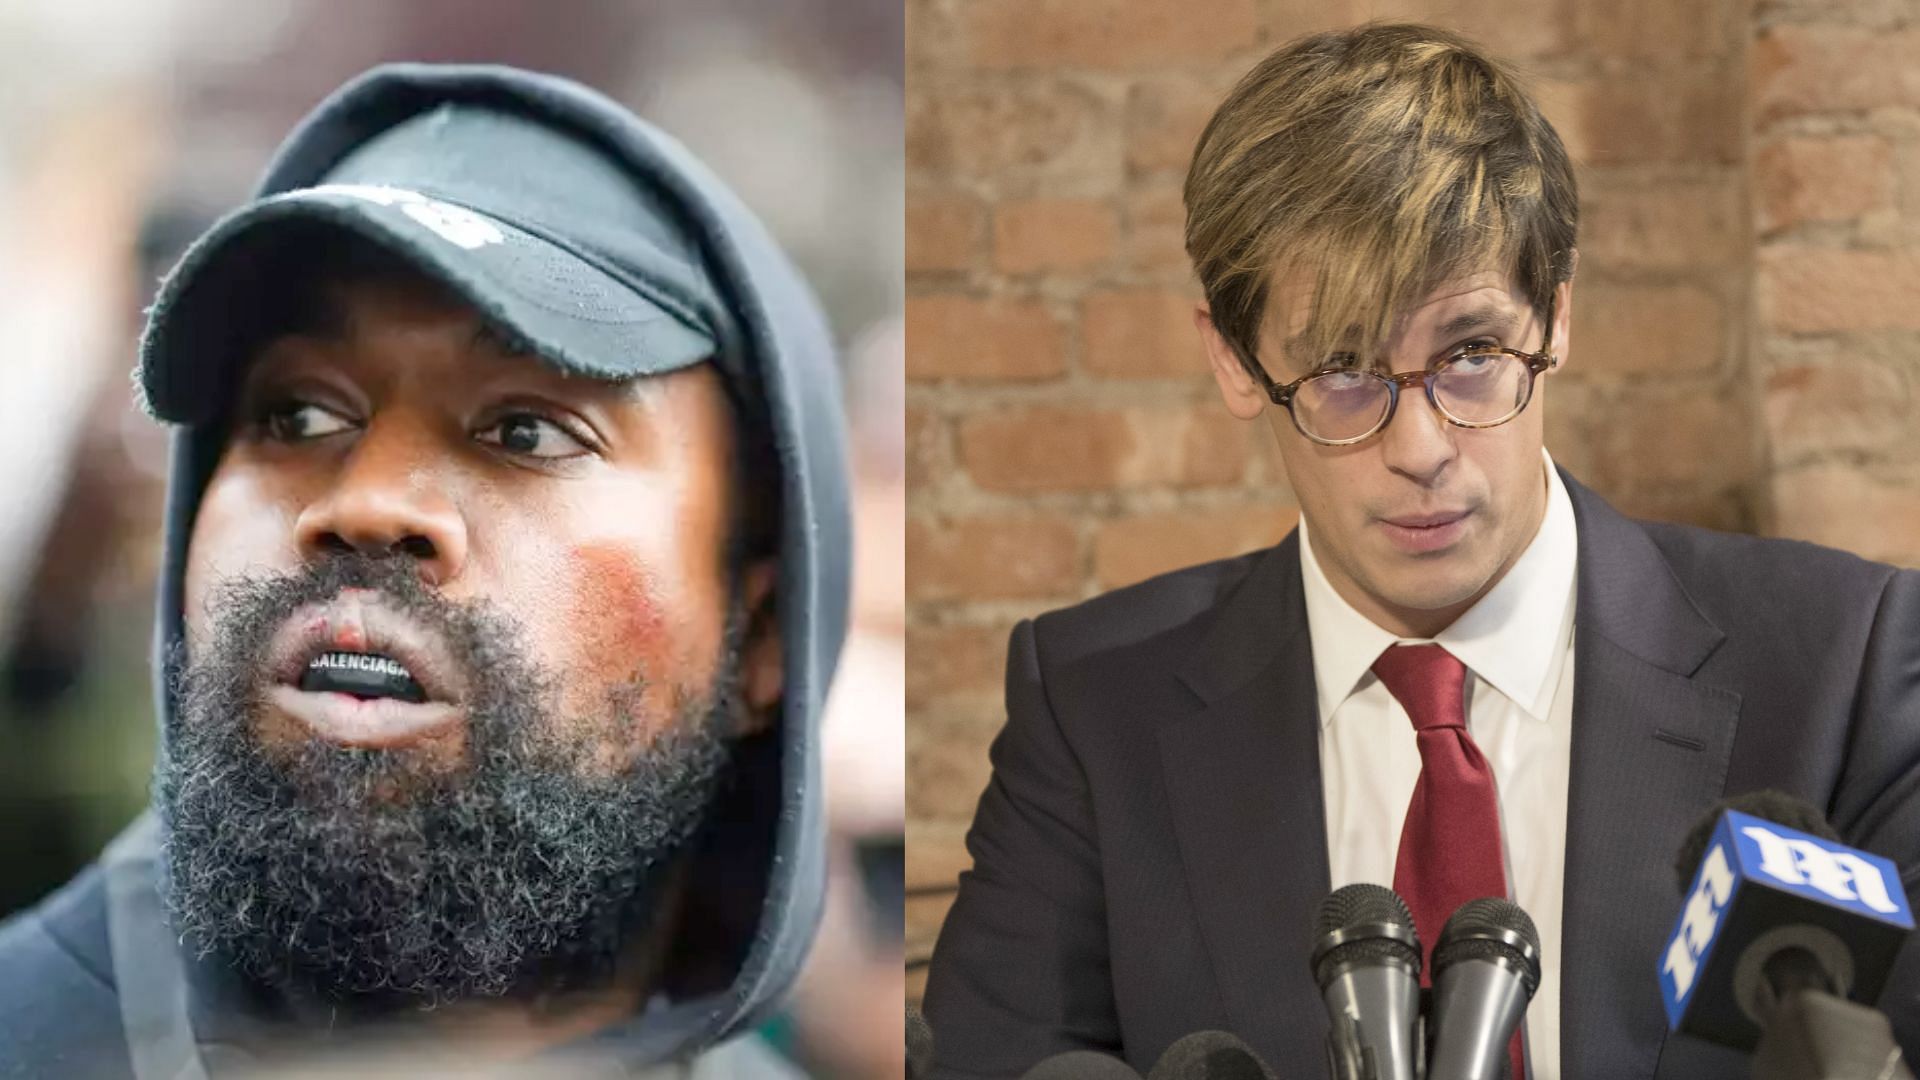 Kanye appoints alt-right commentator to work in his 2024 campaign. (image via Getty/Mary Altaffer and Edward Berthelot)